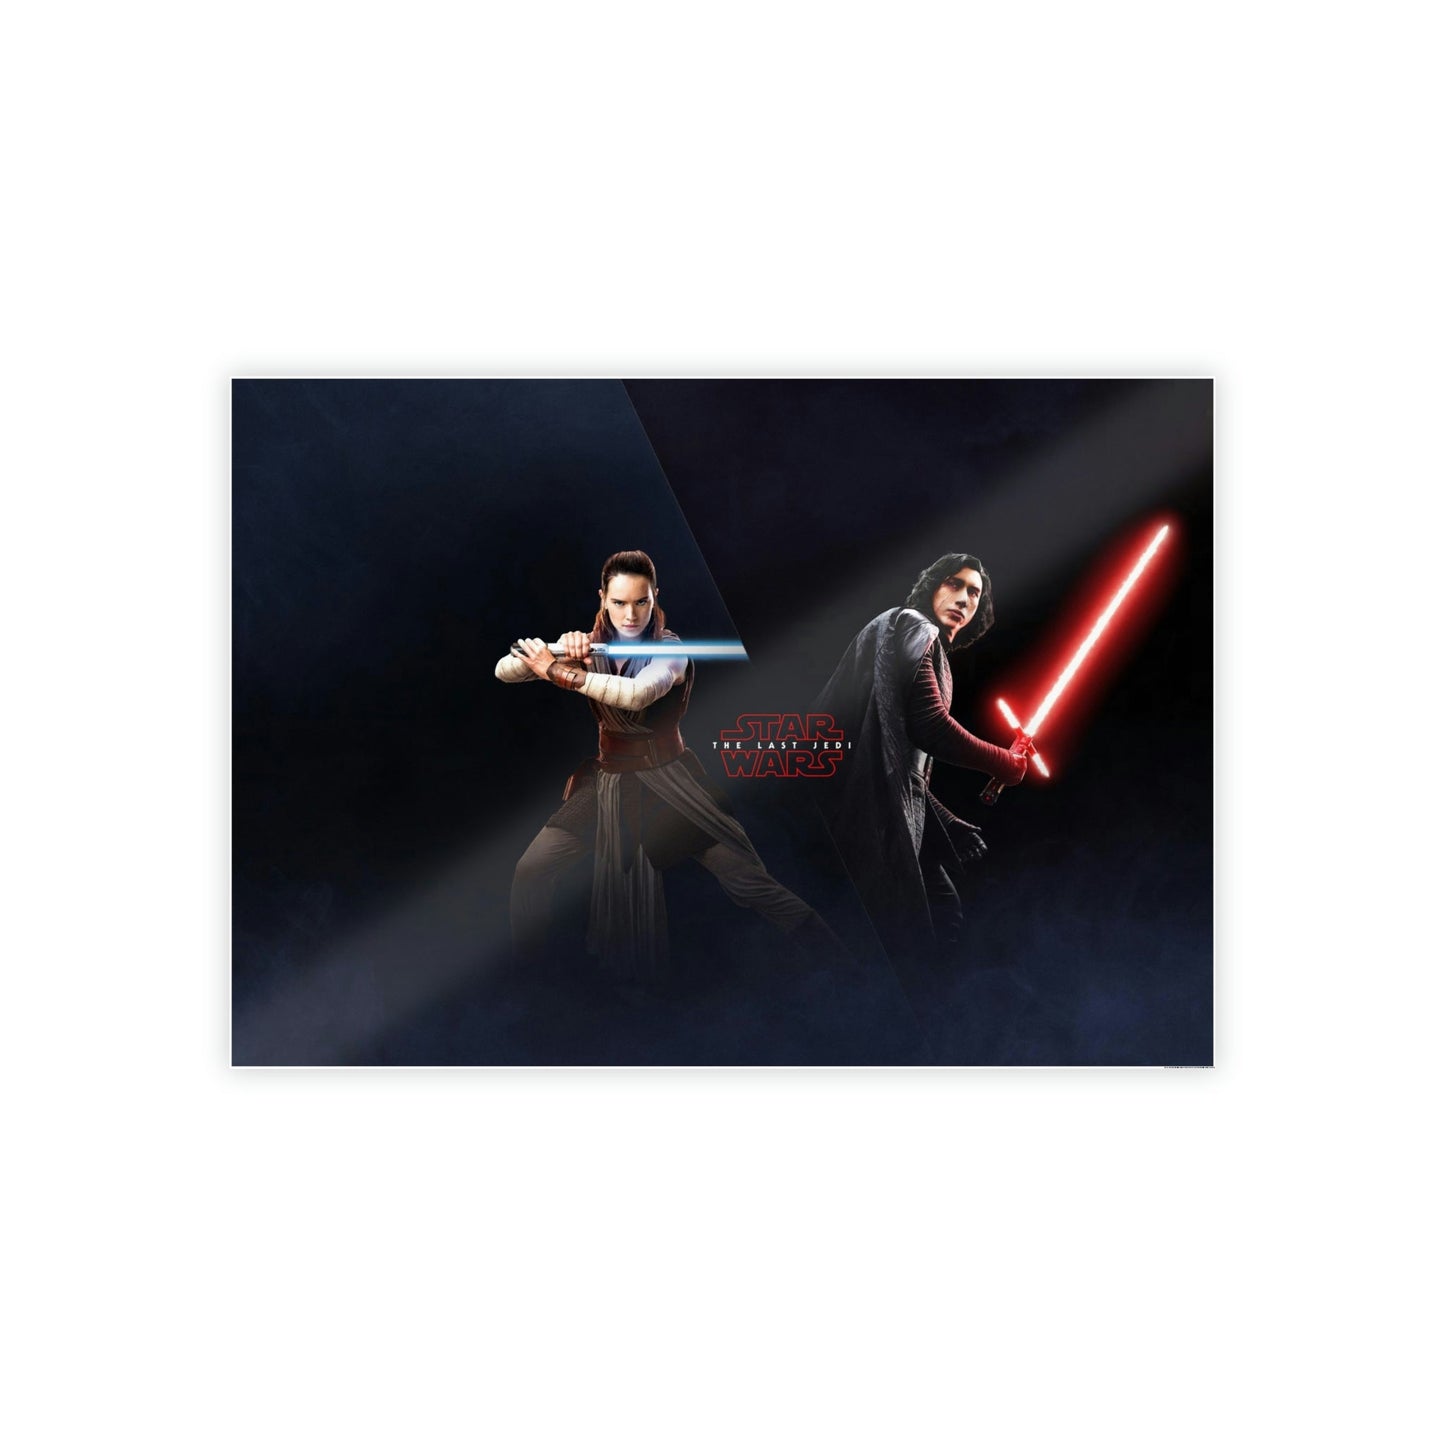 Battle for the Galaxy: Star Wars Wall Art on Canvas & Poster for Sci-Fi Fans